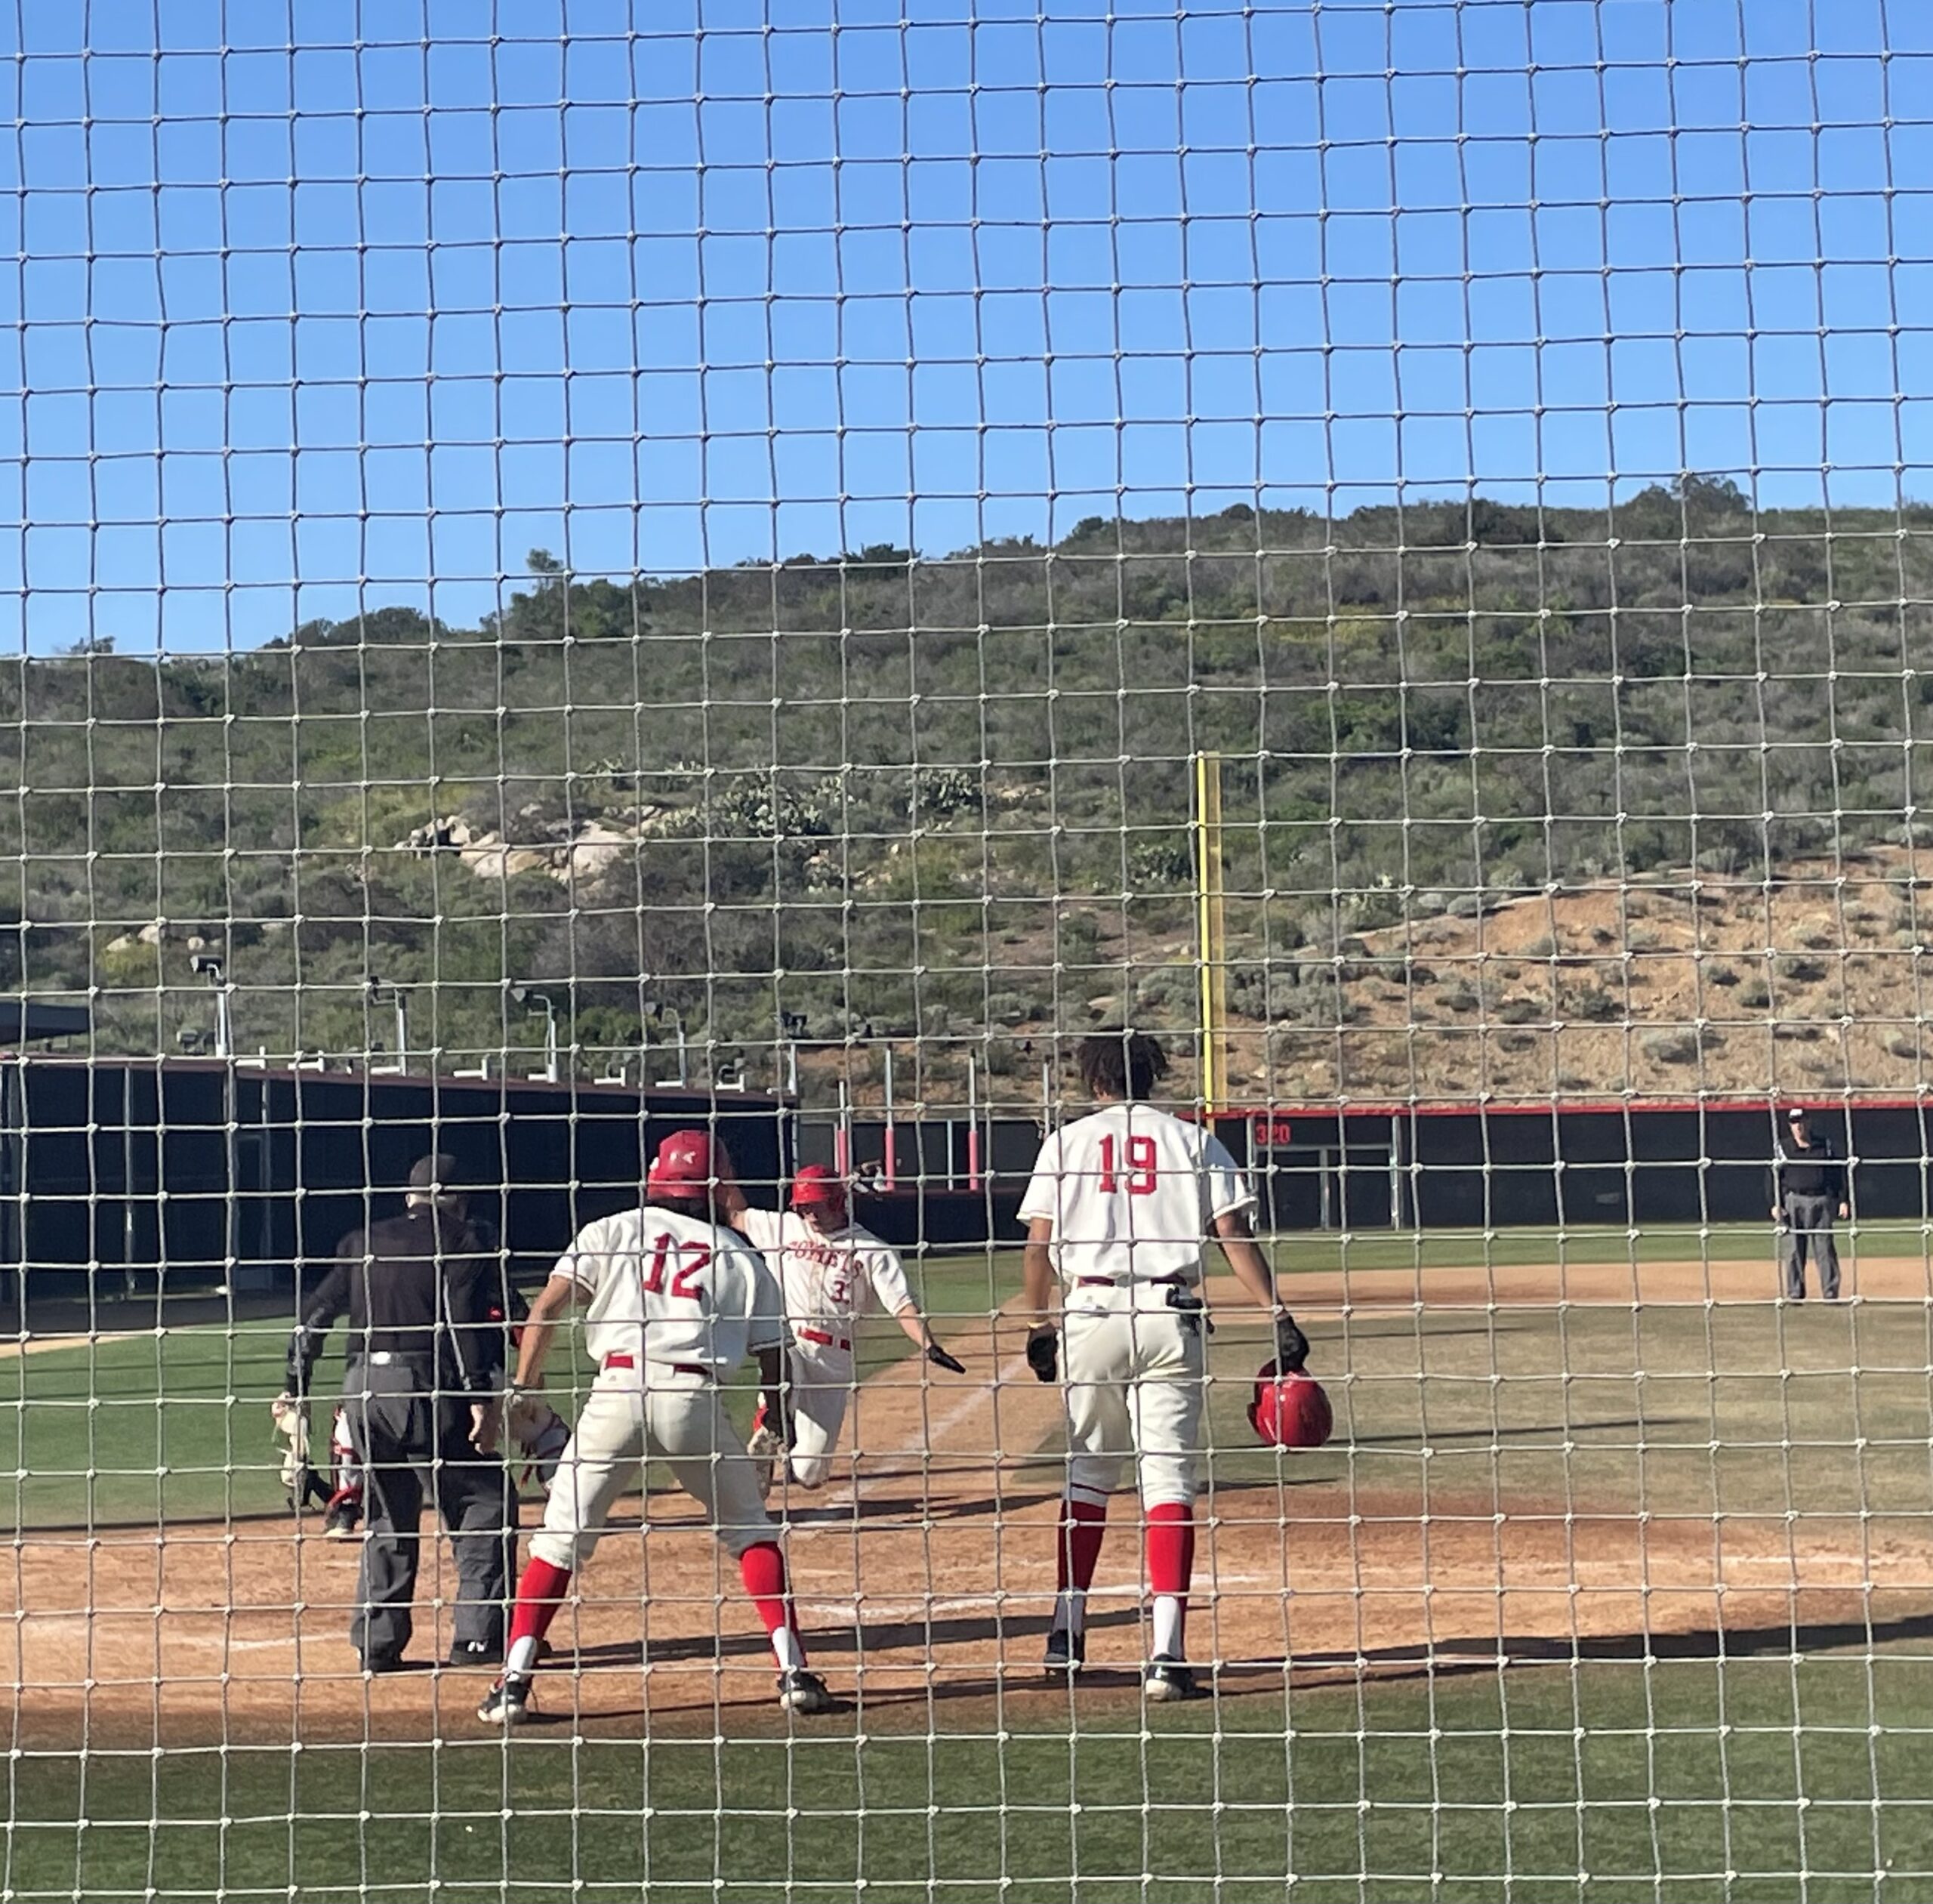 Two Palomar baseball players and an umpire watches another teammate slide into base. A net is in the foreground.